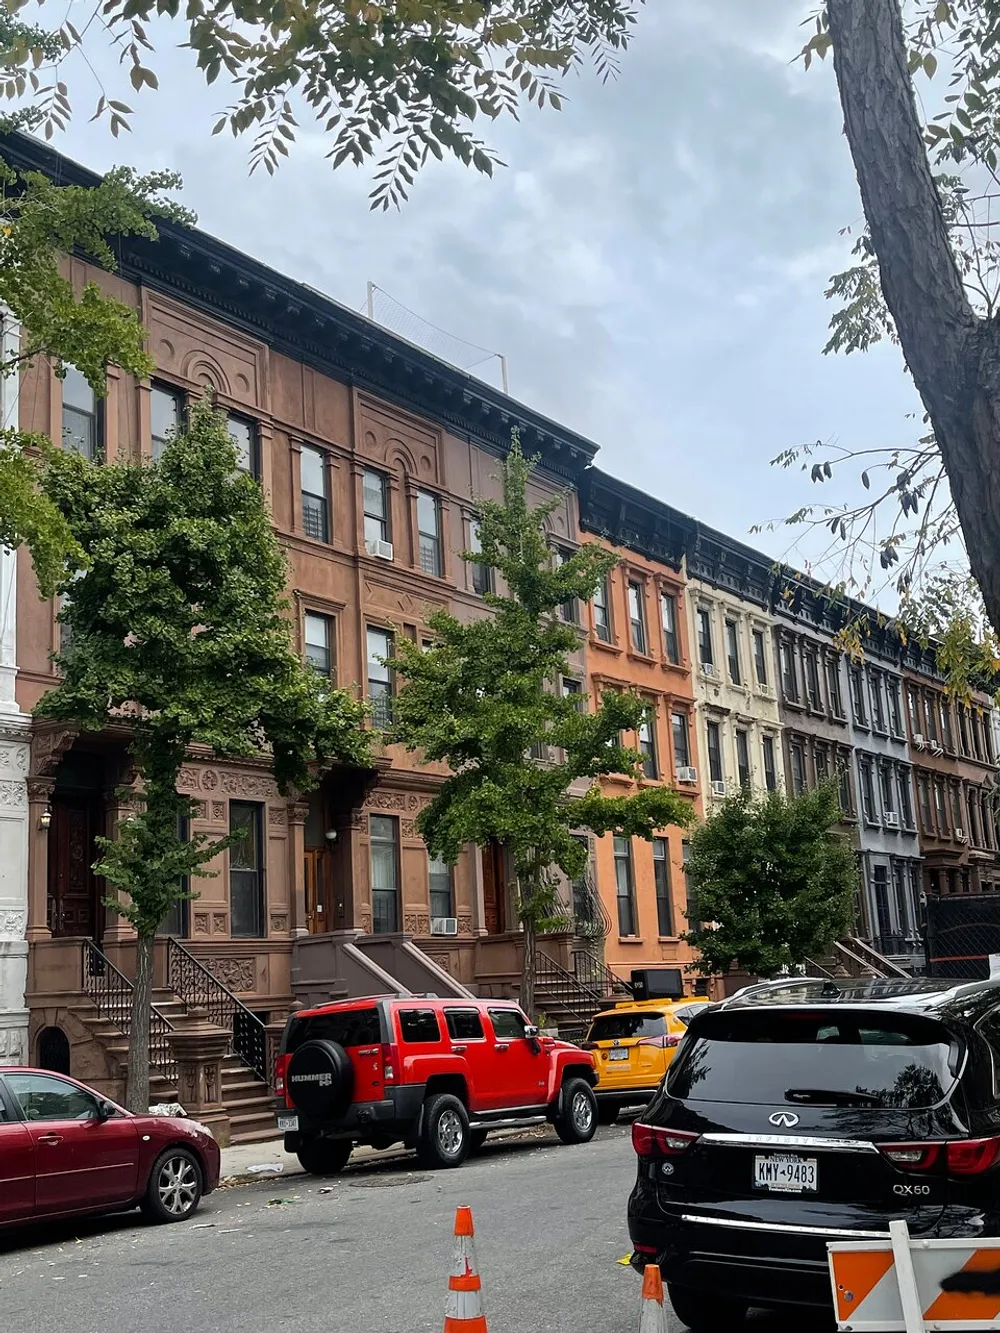 The image shows a street lined with brownstone townhouses a variety of parked cars and some greenery under an overcast sky